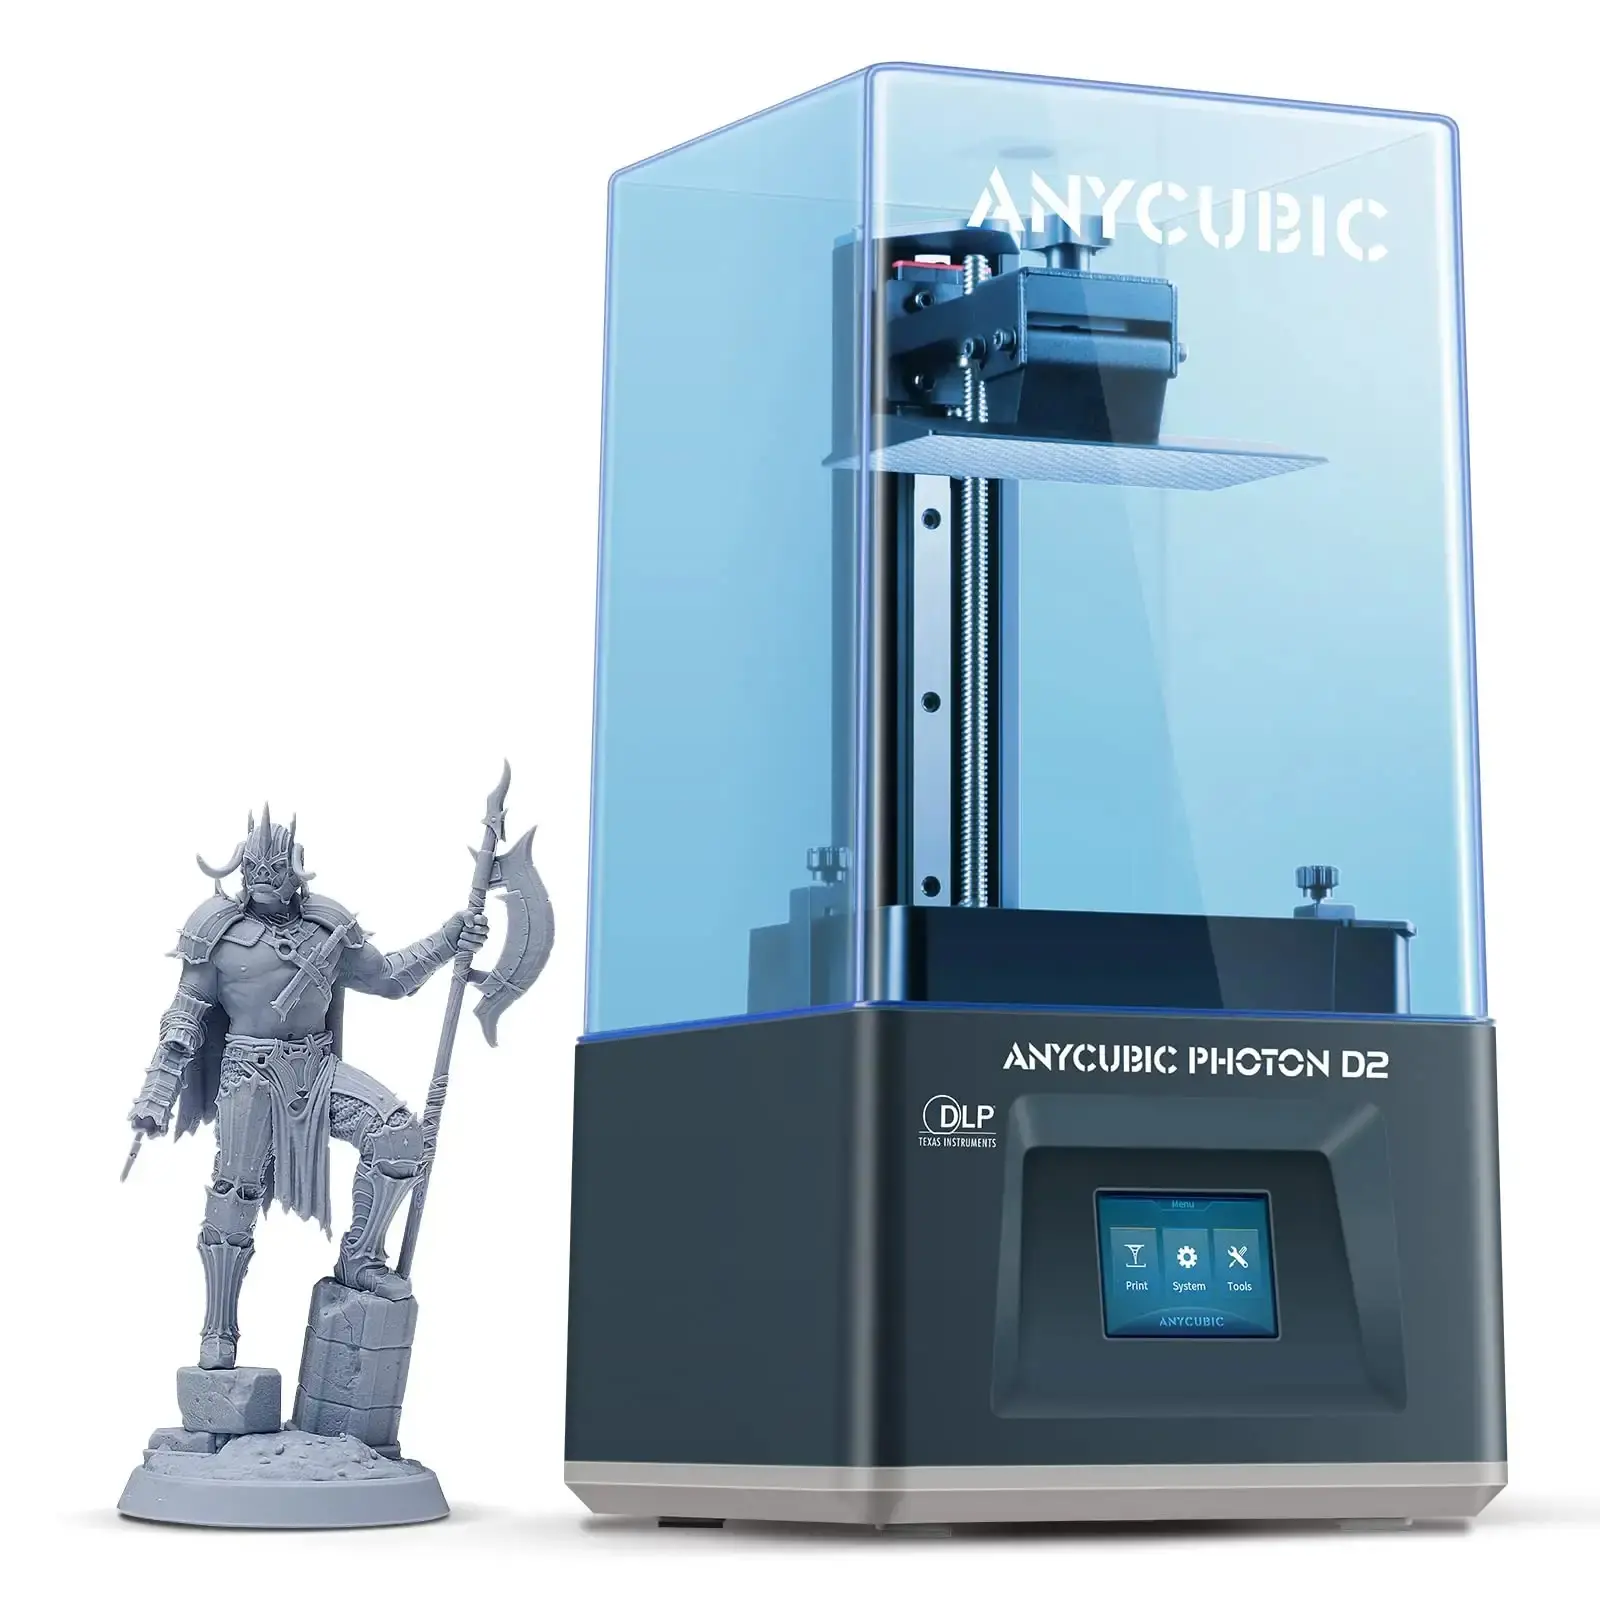 ANYCUBIC Photon D2 Resin DLP 3D Printer UV-LED light source with High Precision Ultra-Silent Printing Long Usage Life-Span